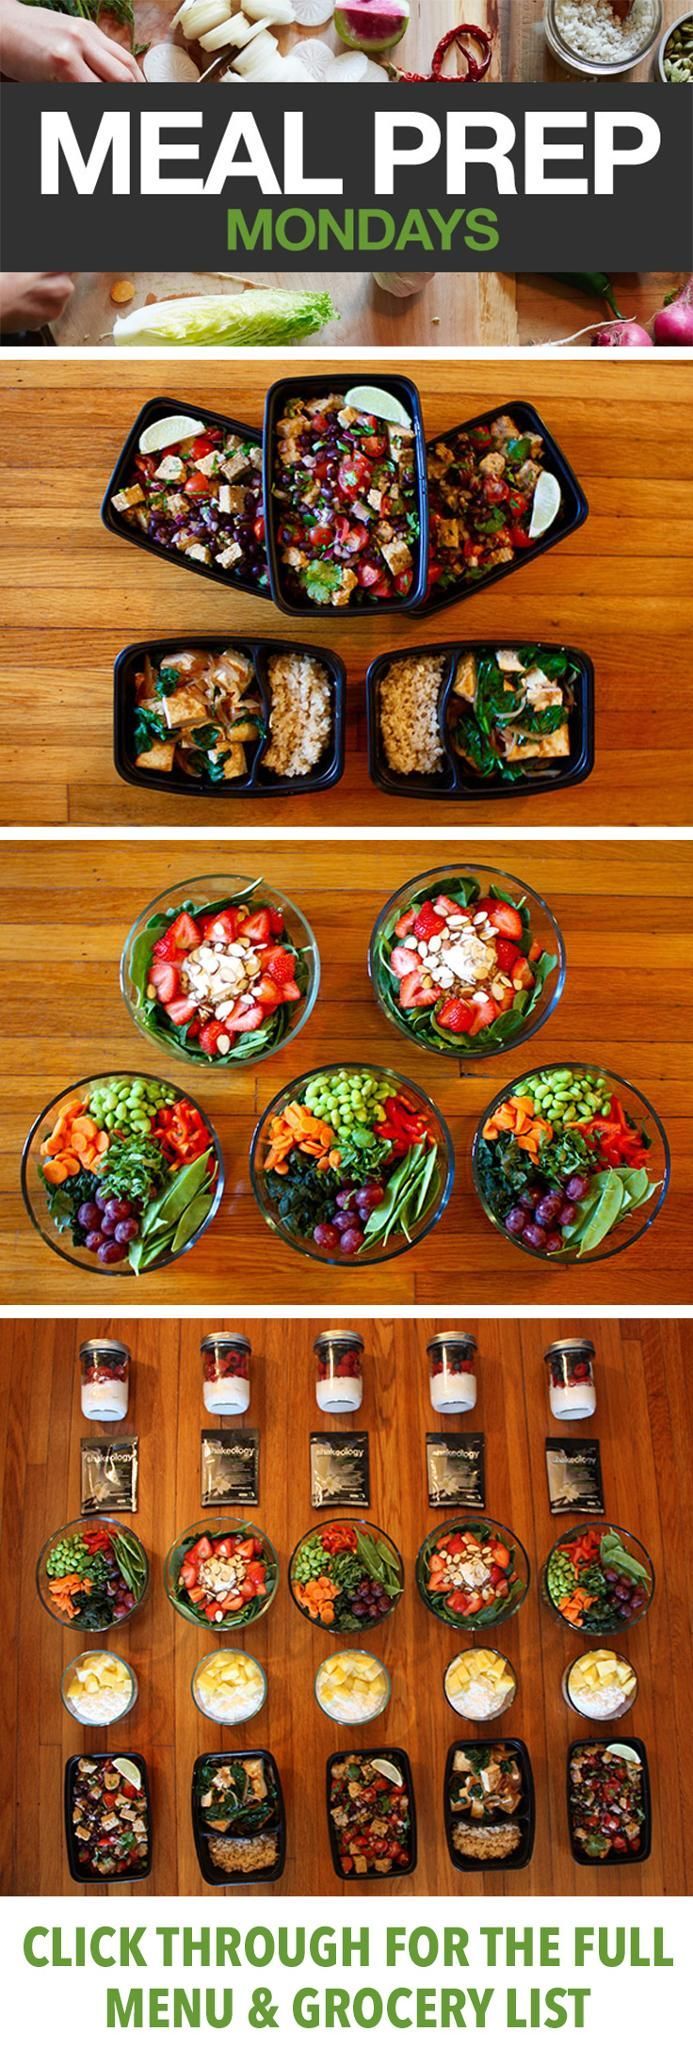 Vegetarian Meal Prep For 21 Day Fix – If you are vegetarian, or ever considered switching to a vegetarian diet, this 21 Day